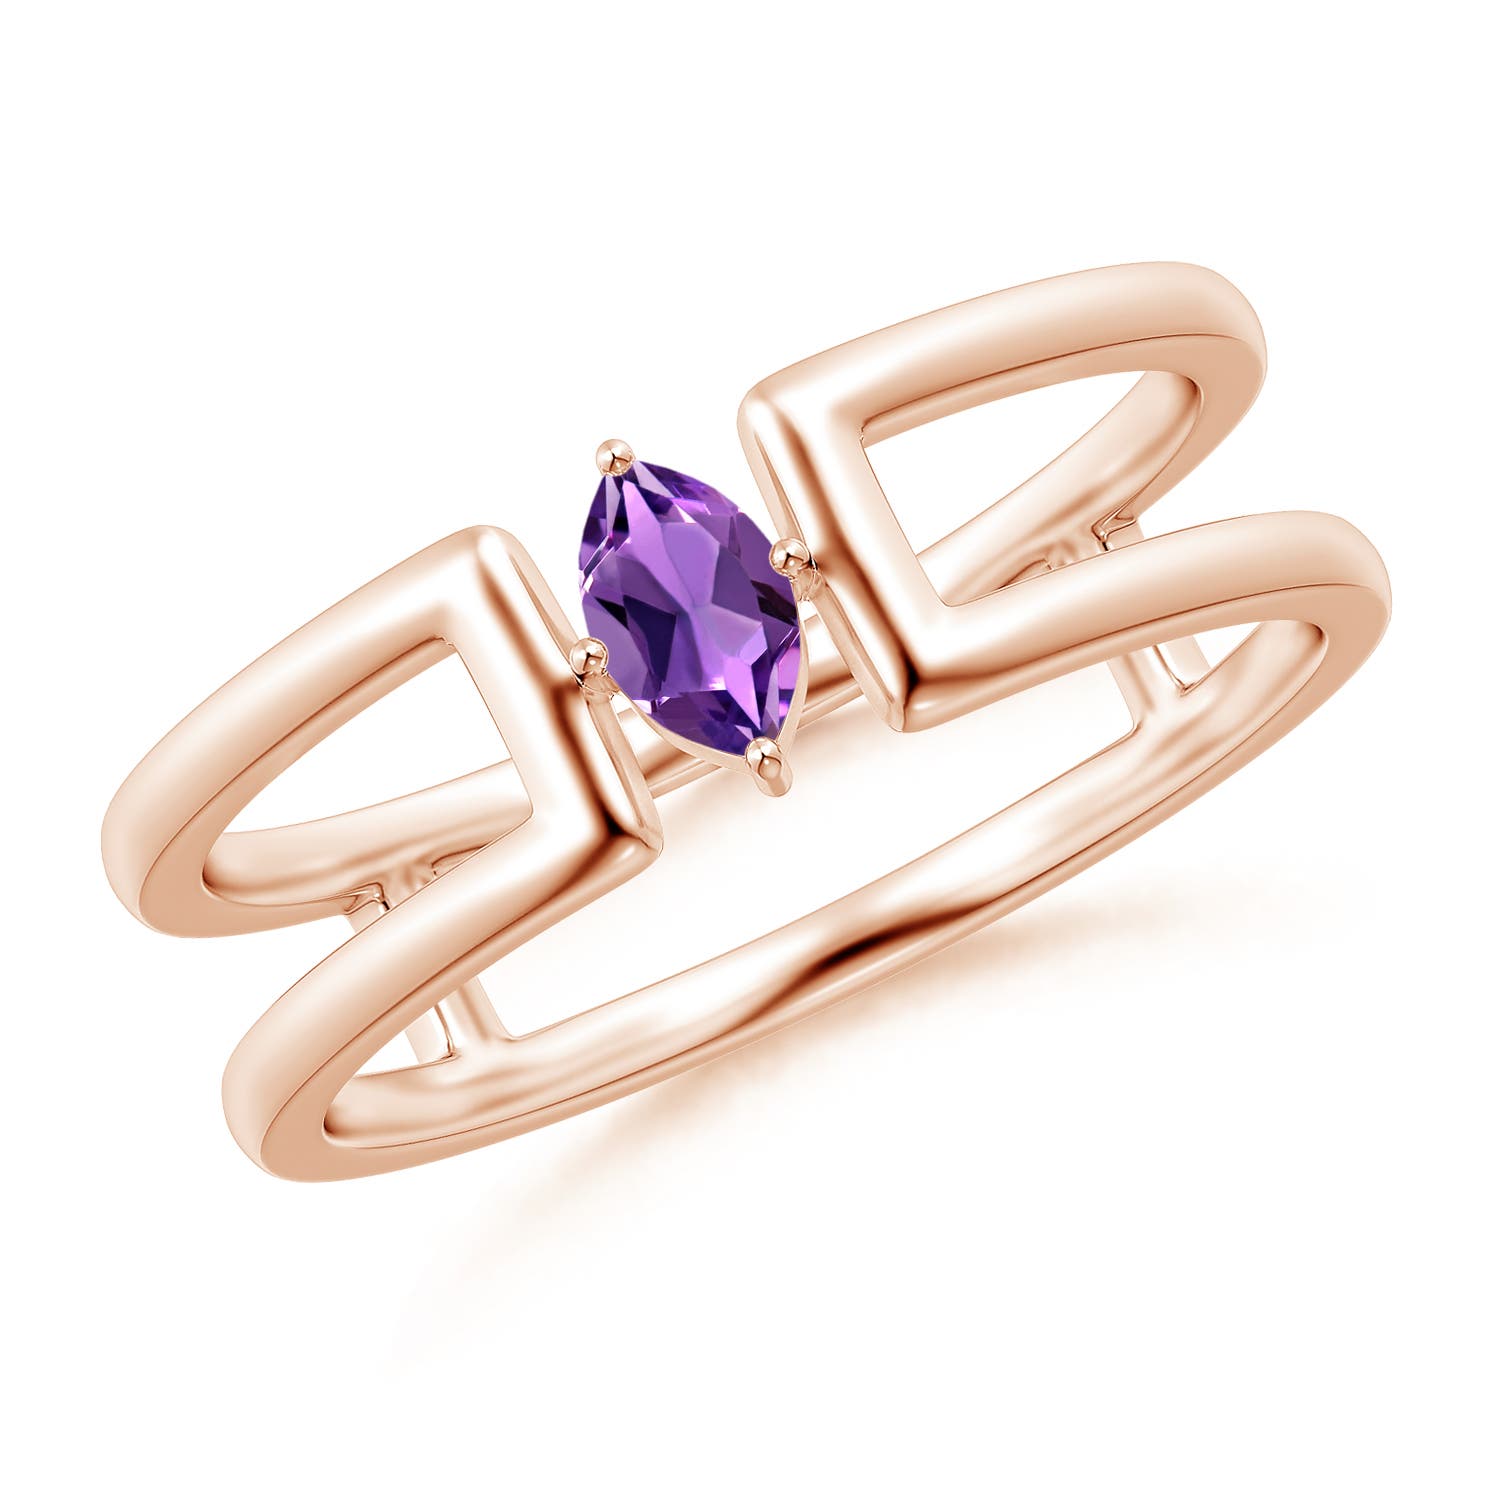 AAA - Amethyst / 0.13 CT / 14 KT Rose Gold